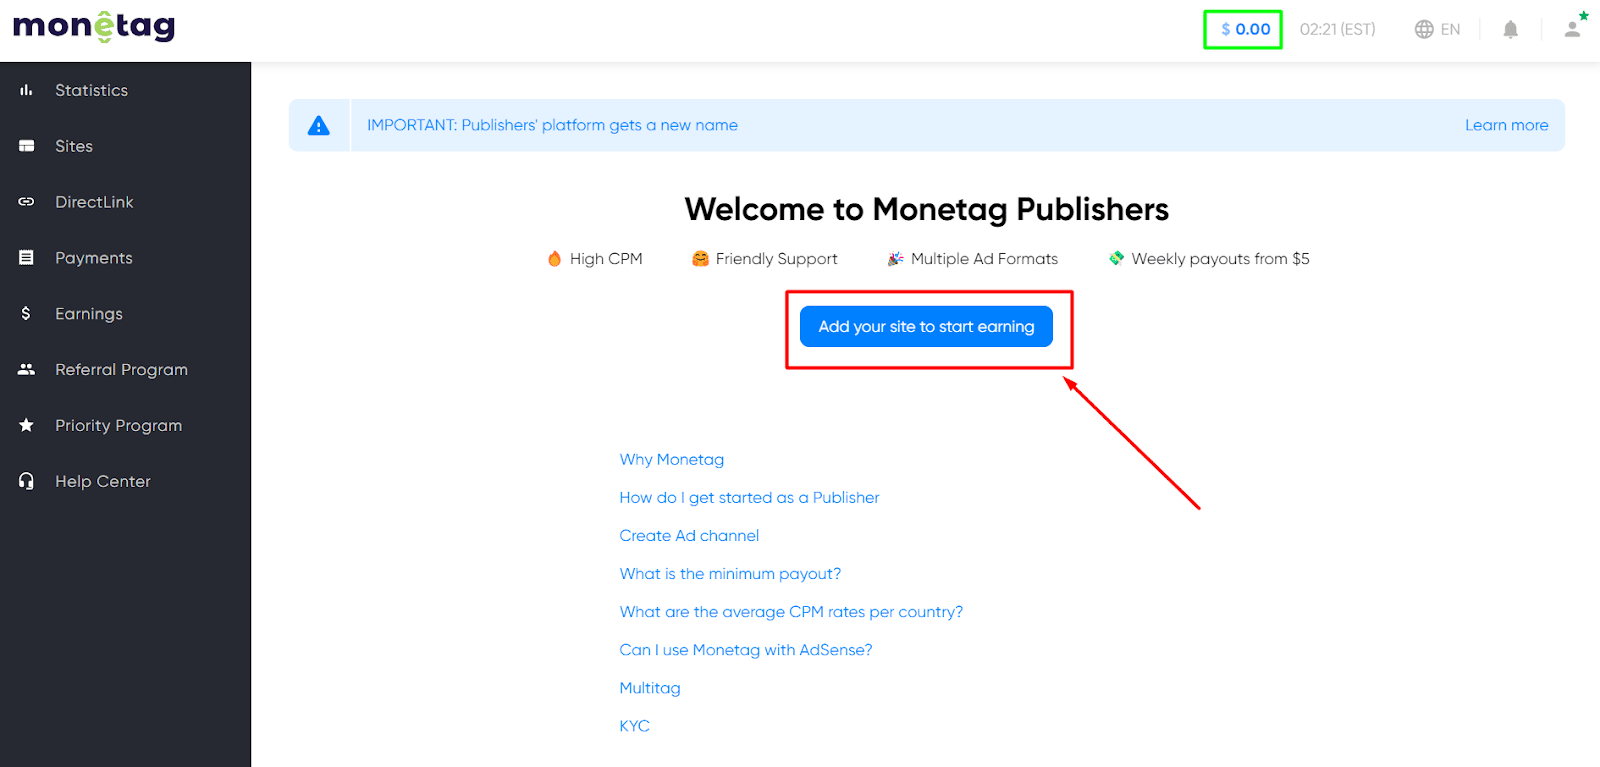 Add your site to make money in Monetag